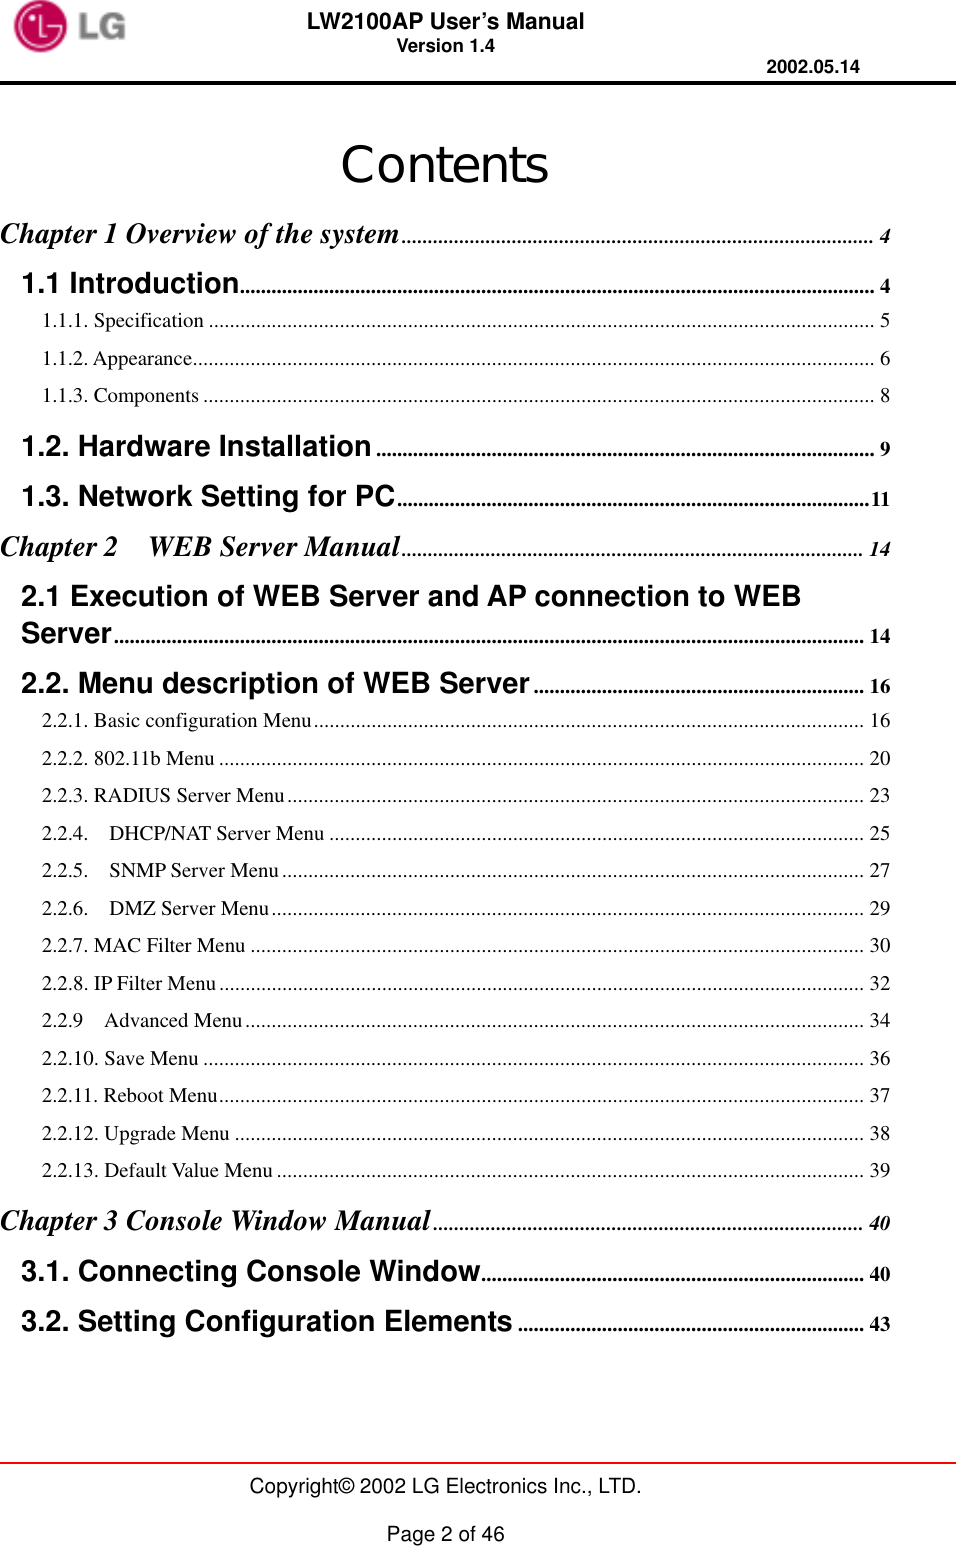 LW2100AP User’s Manual Version 1.4 2002.05.14   Copyright© 2002 LG Electronics Inc., LTD.  Page 2 of 46  Contents Chapter 1 Overview of the system.......................................................................................... 4 1.1 Introduction......................................................................................................................... 4 1.1.1. Specification ............................................................................................................................... 5 1.1.2. Appearance.................................................................................................................................. 6 1.1.3. Components ................................................................................................................................ 8 1.2. Hardware Installation............................................................................................... 9 1.3. Network Setting for PC..........................................................................................11 Chapter 2    WEB Server Manual........................................................................................ 14 2.1 Execution of WEB Server and AP connection to WEB Server............................................................................................................................................... 14 2.2. Menu description of WEB Server............................................................... 16 2.2.1. Basic configuration Menu......................................................................................................... 16 2.2.2. 802.11b Menu ........................................................................................................................... 20 2.2.3. RADIUS Server Menu.............................................................................................................. 23 2.2.4.  DHCP/NAT Server Menu ...................................................................................................... 25 2.2.5.    SNMP Server Menu............................................................................................................... 27 2.2.6.  DMZ Server Menu................................................................................................................. 29 2.2.7. MAC Filter Menu ..................................................................................................................... 30 2.2.8. IP Filter Menu........................................................................................................................... 32 2.2.9  Advanced Menu...................................................................................................................... 34 2.2.10. Save Menu .............................................................................................................................. 36 2.2.11. Reboot Menu........................................................................................................................... 37 2.2.12. Upgrade Menu ........................................................................................................................ 38 2.2.13. Default Value Menu ................................................................................................................ 39 Chapter 3 Console Window Manual.................................................................................. 40 3.1. Connecting Console Window......................................................................... 40 3.2. Setting Configuration Elements .................................................................. 43  